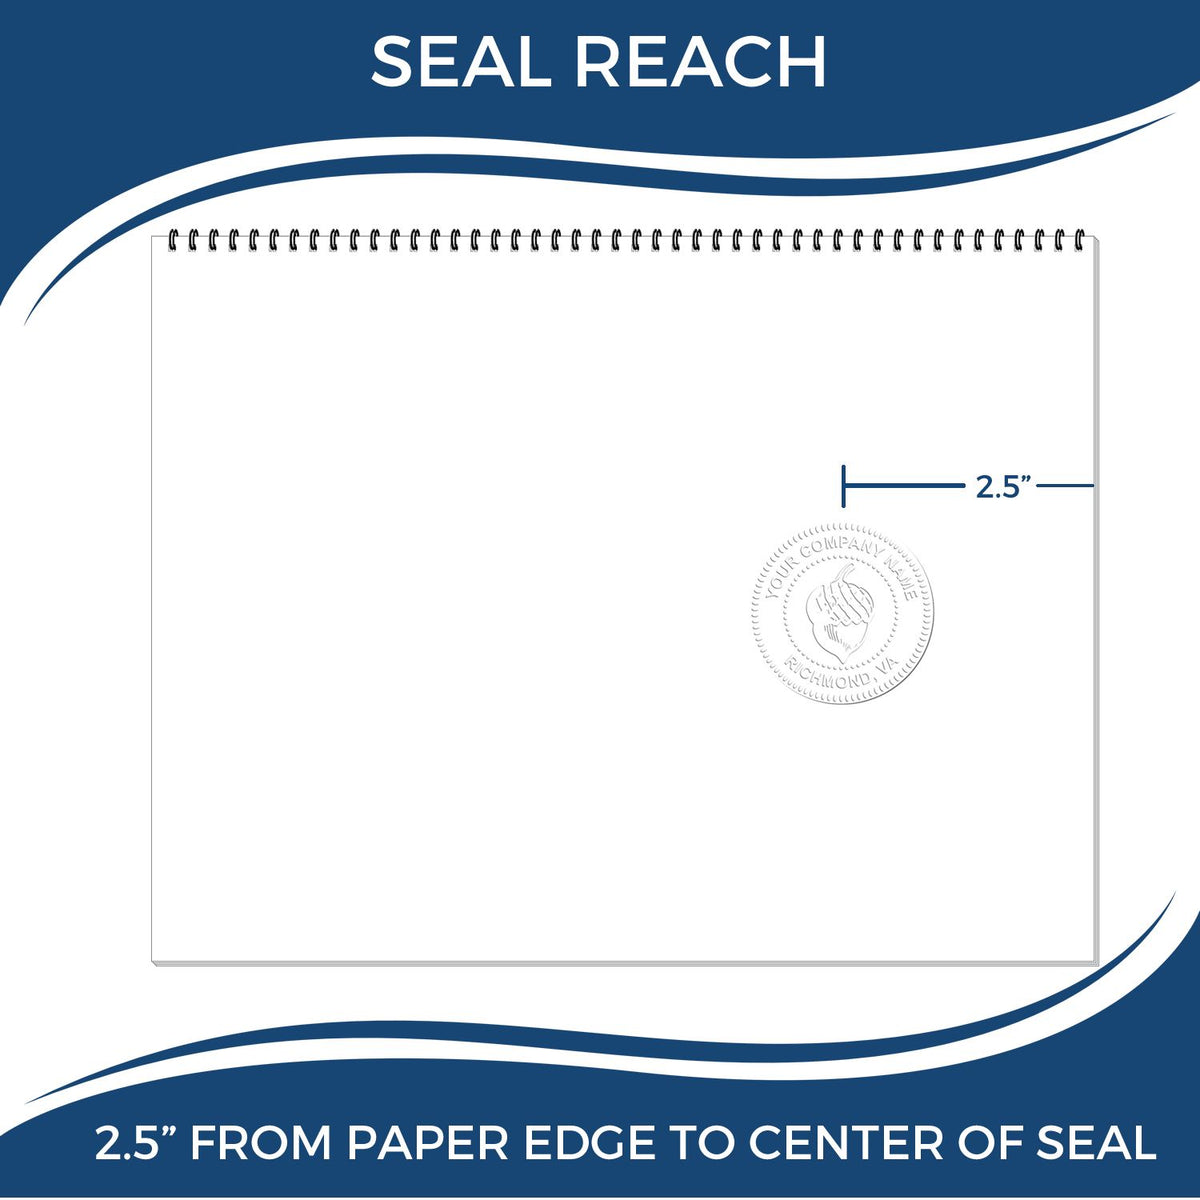 An infographic showing the seal reach which is represented by a ruler and a miniature seal image of the Heavy Duty Cast Iron Florida Geologist Seal Embosser